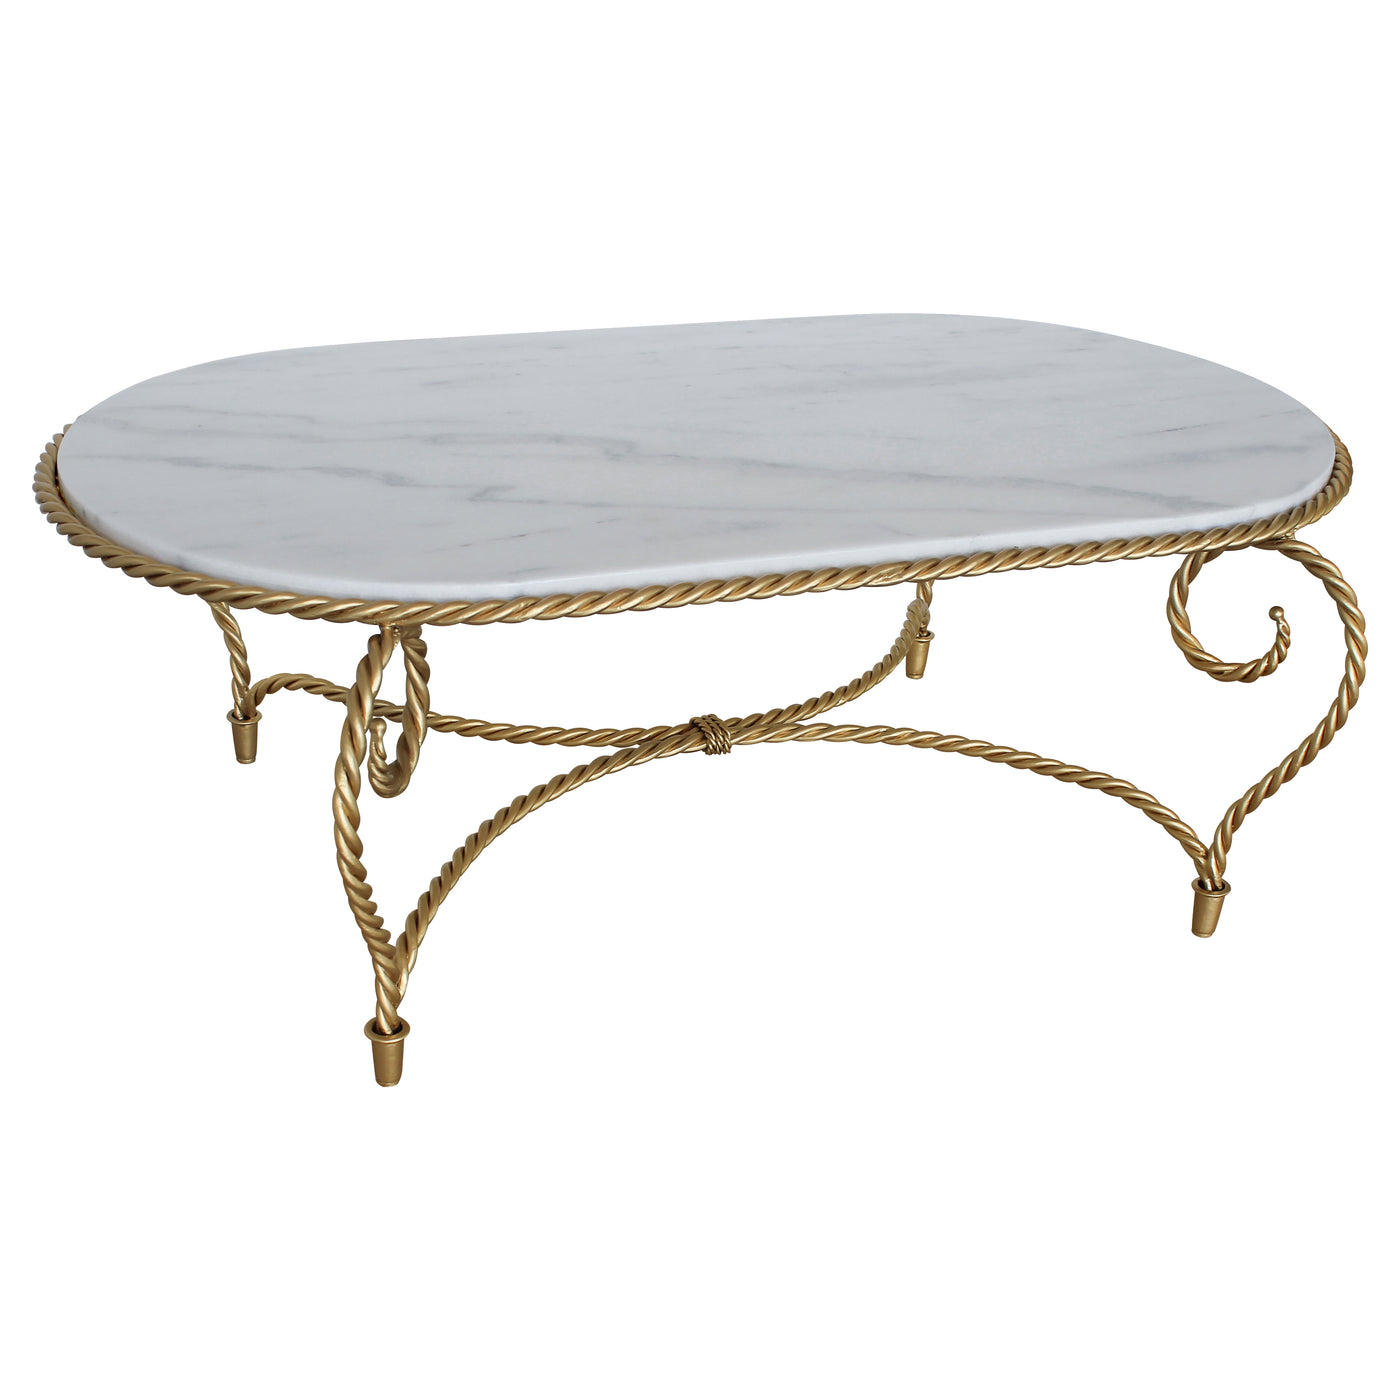 Oval-shaped living room table in golden color and white natural marble top inspired by twisted rope